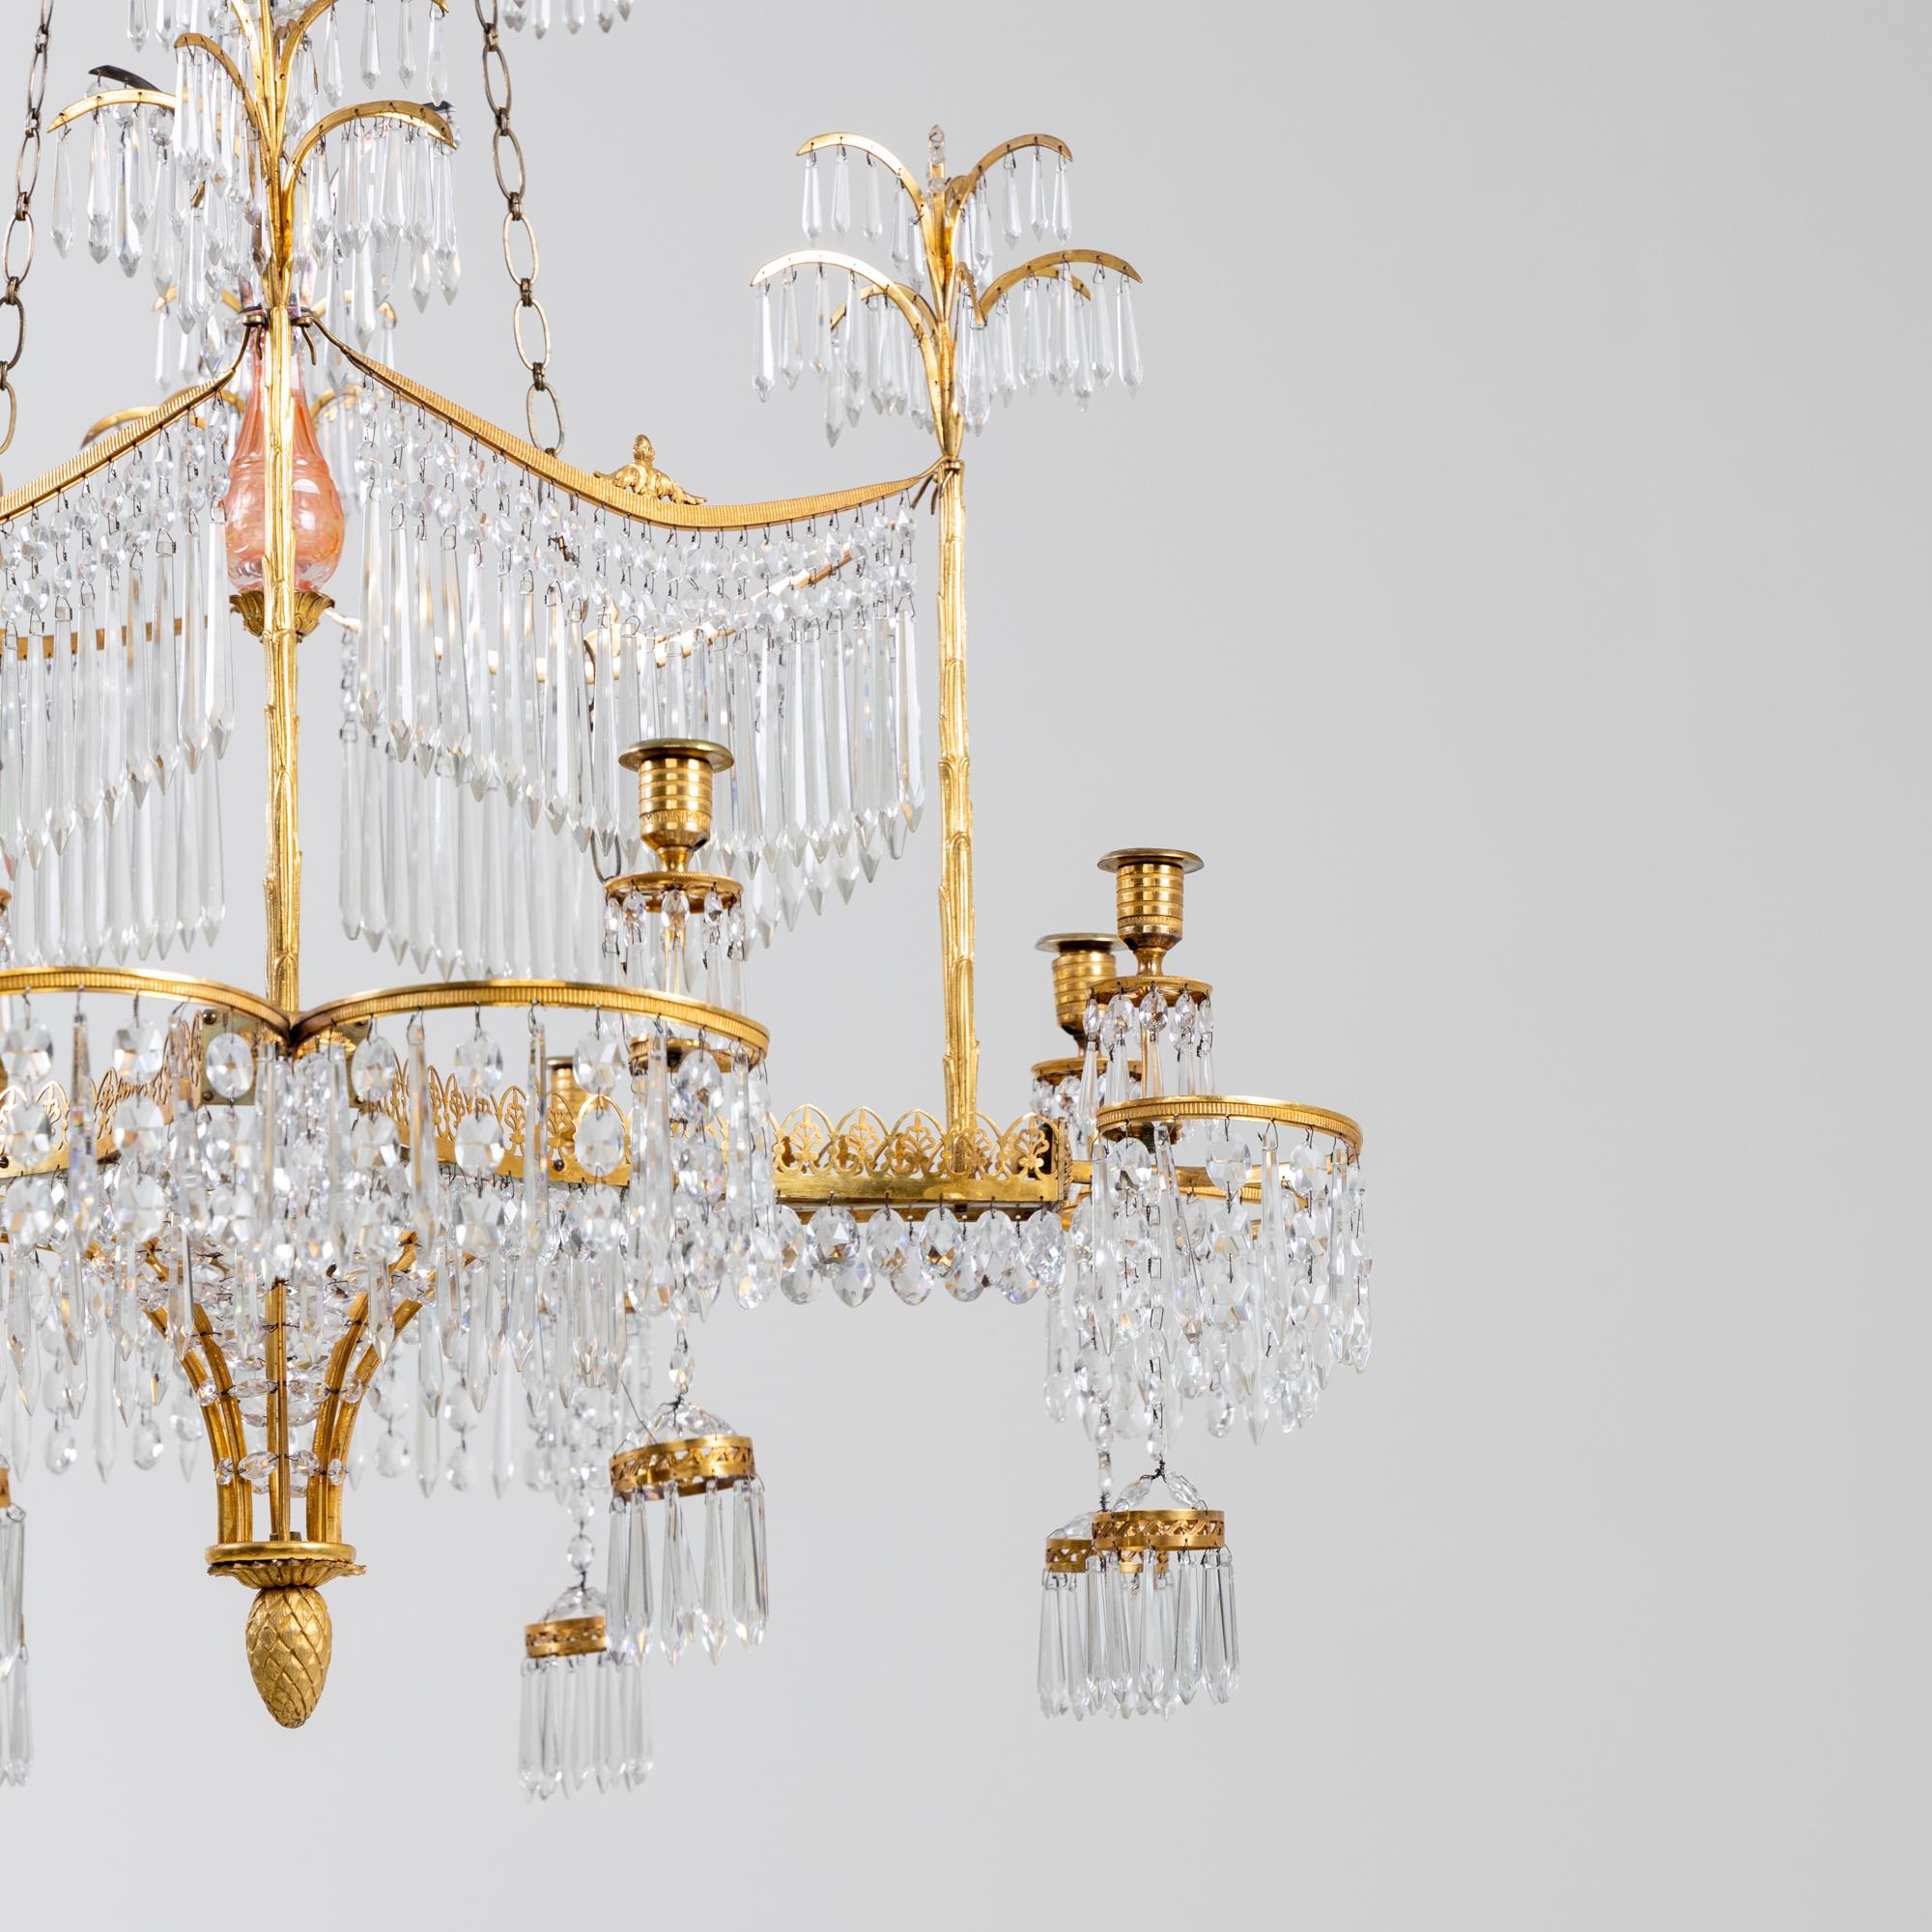 German Chandelier with Palm Trees, Werner & Mieth, Berlin c. 1800-1810 For Sale